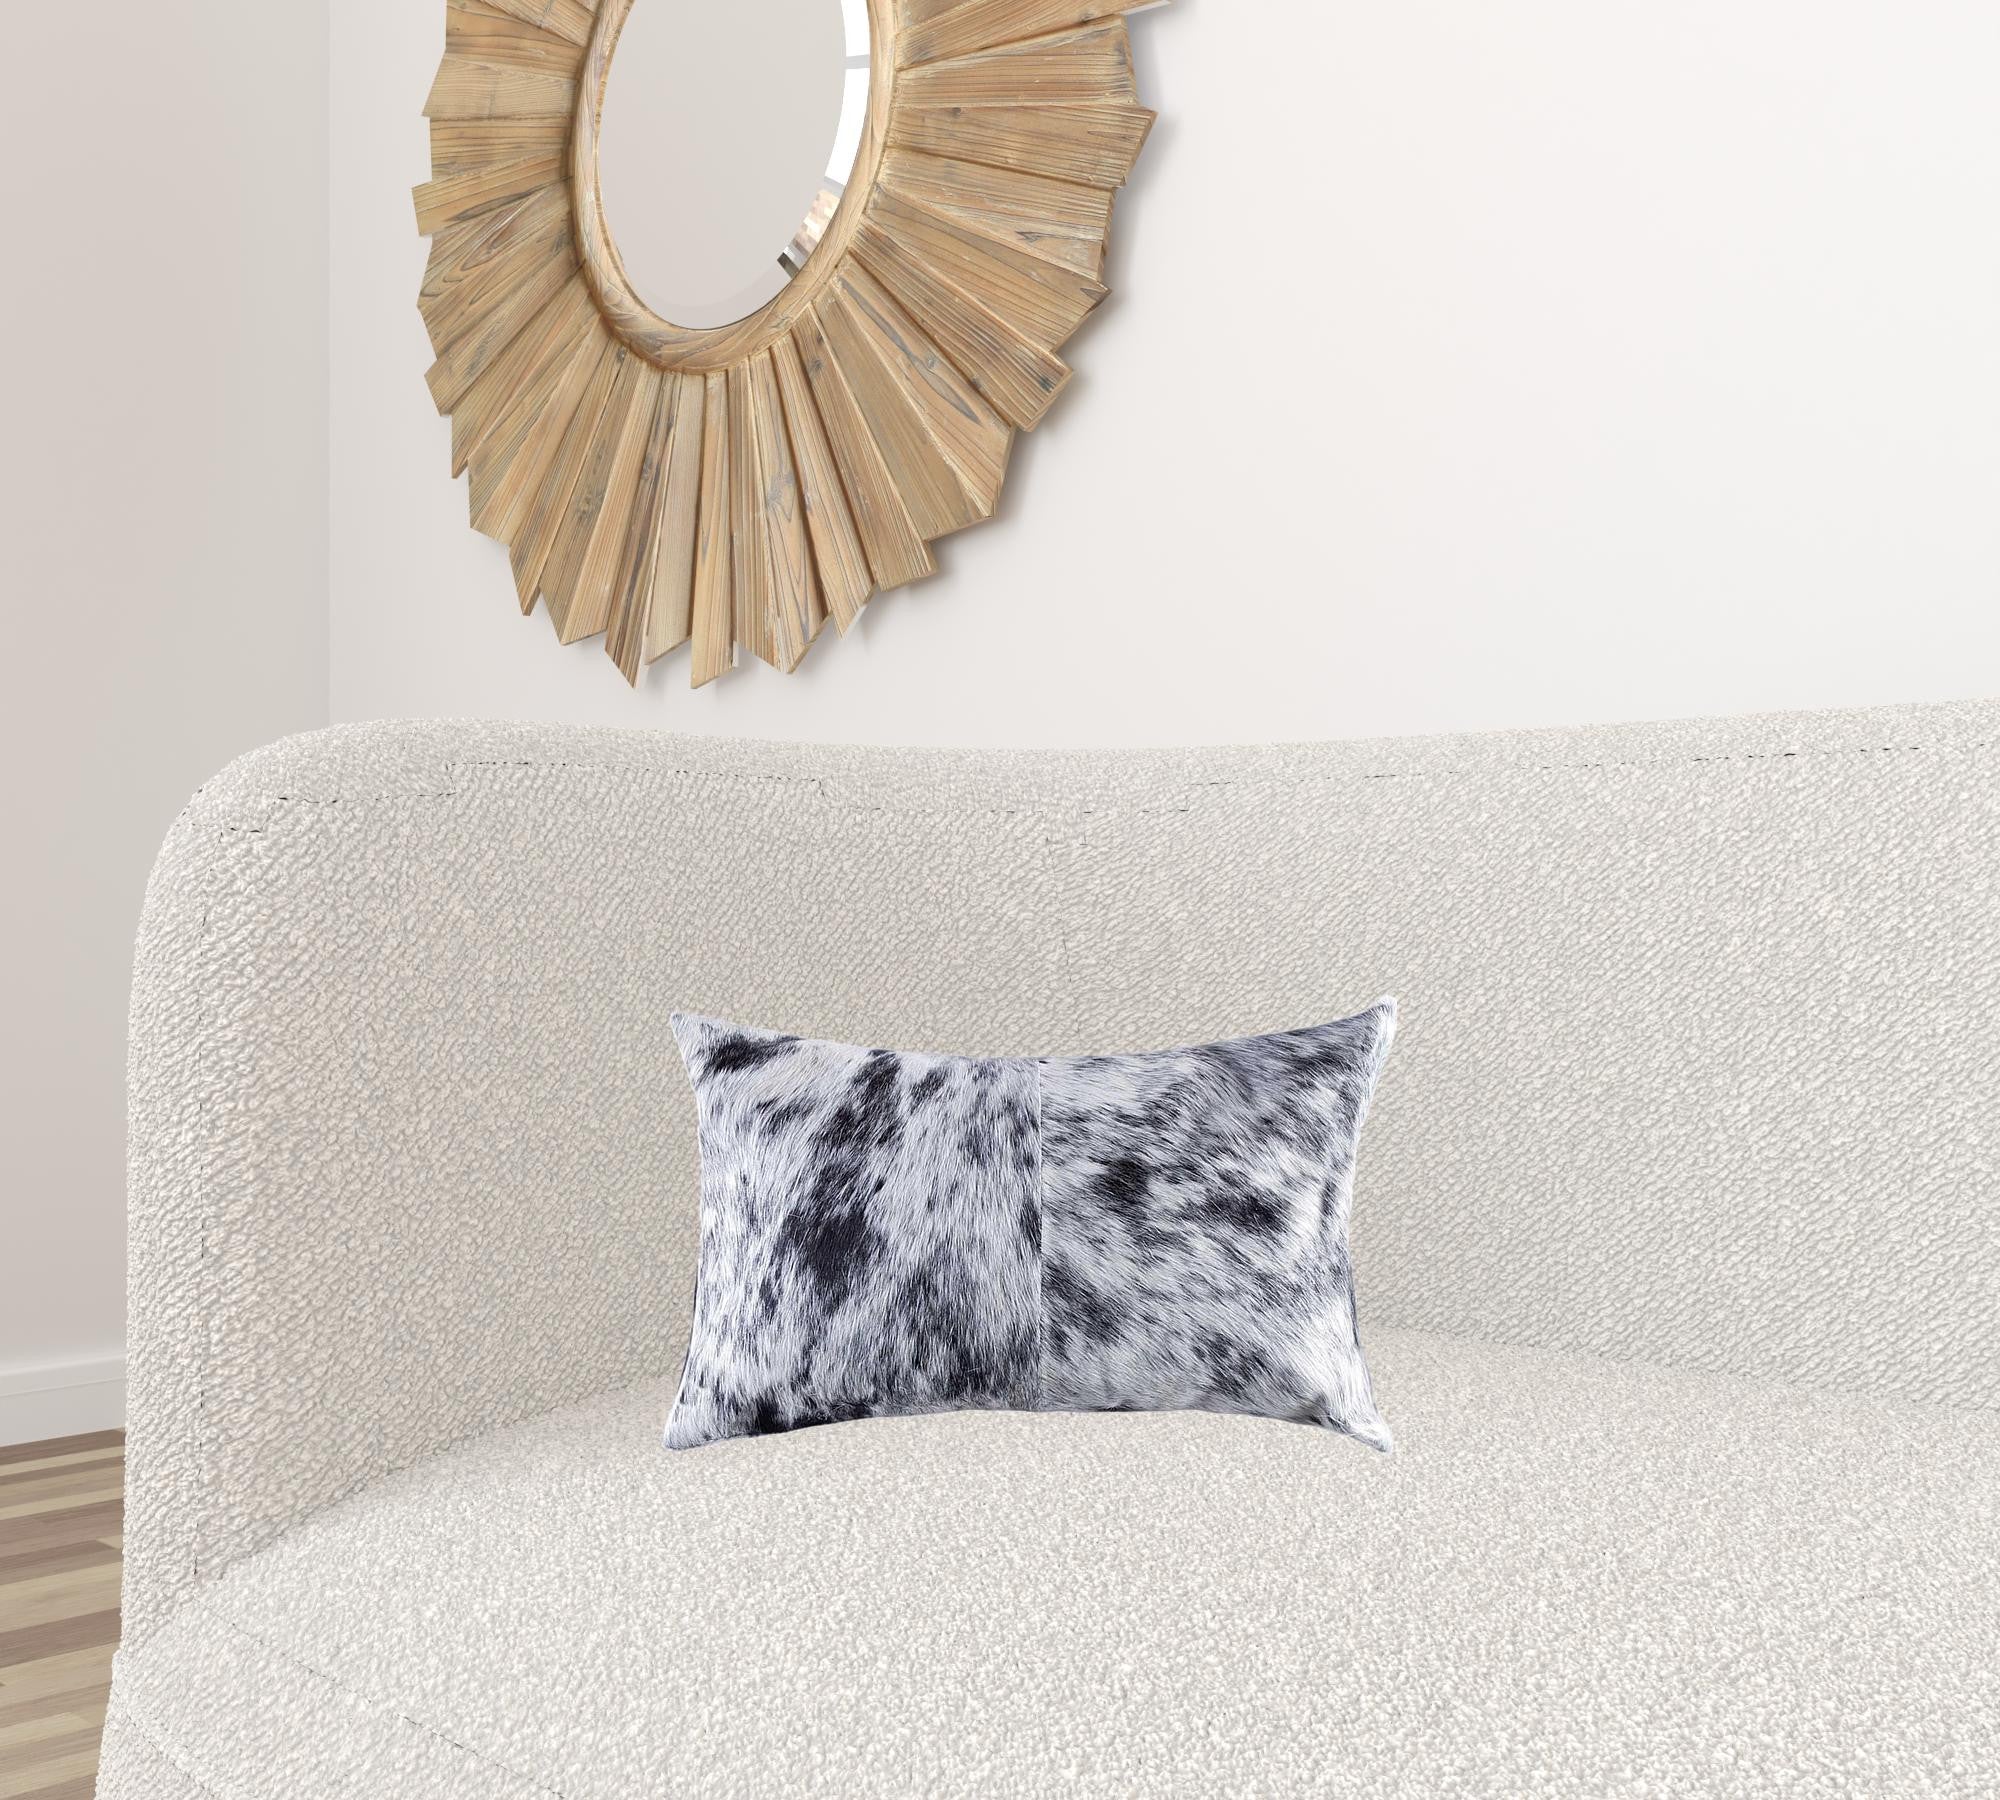 18" X 18" X 5" Salt And Pepper Black And White Cowhide  Pillow